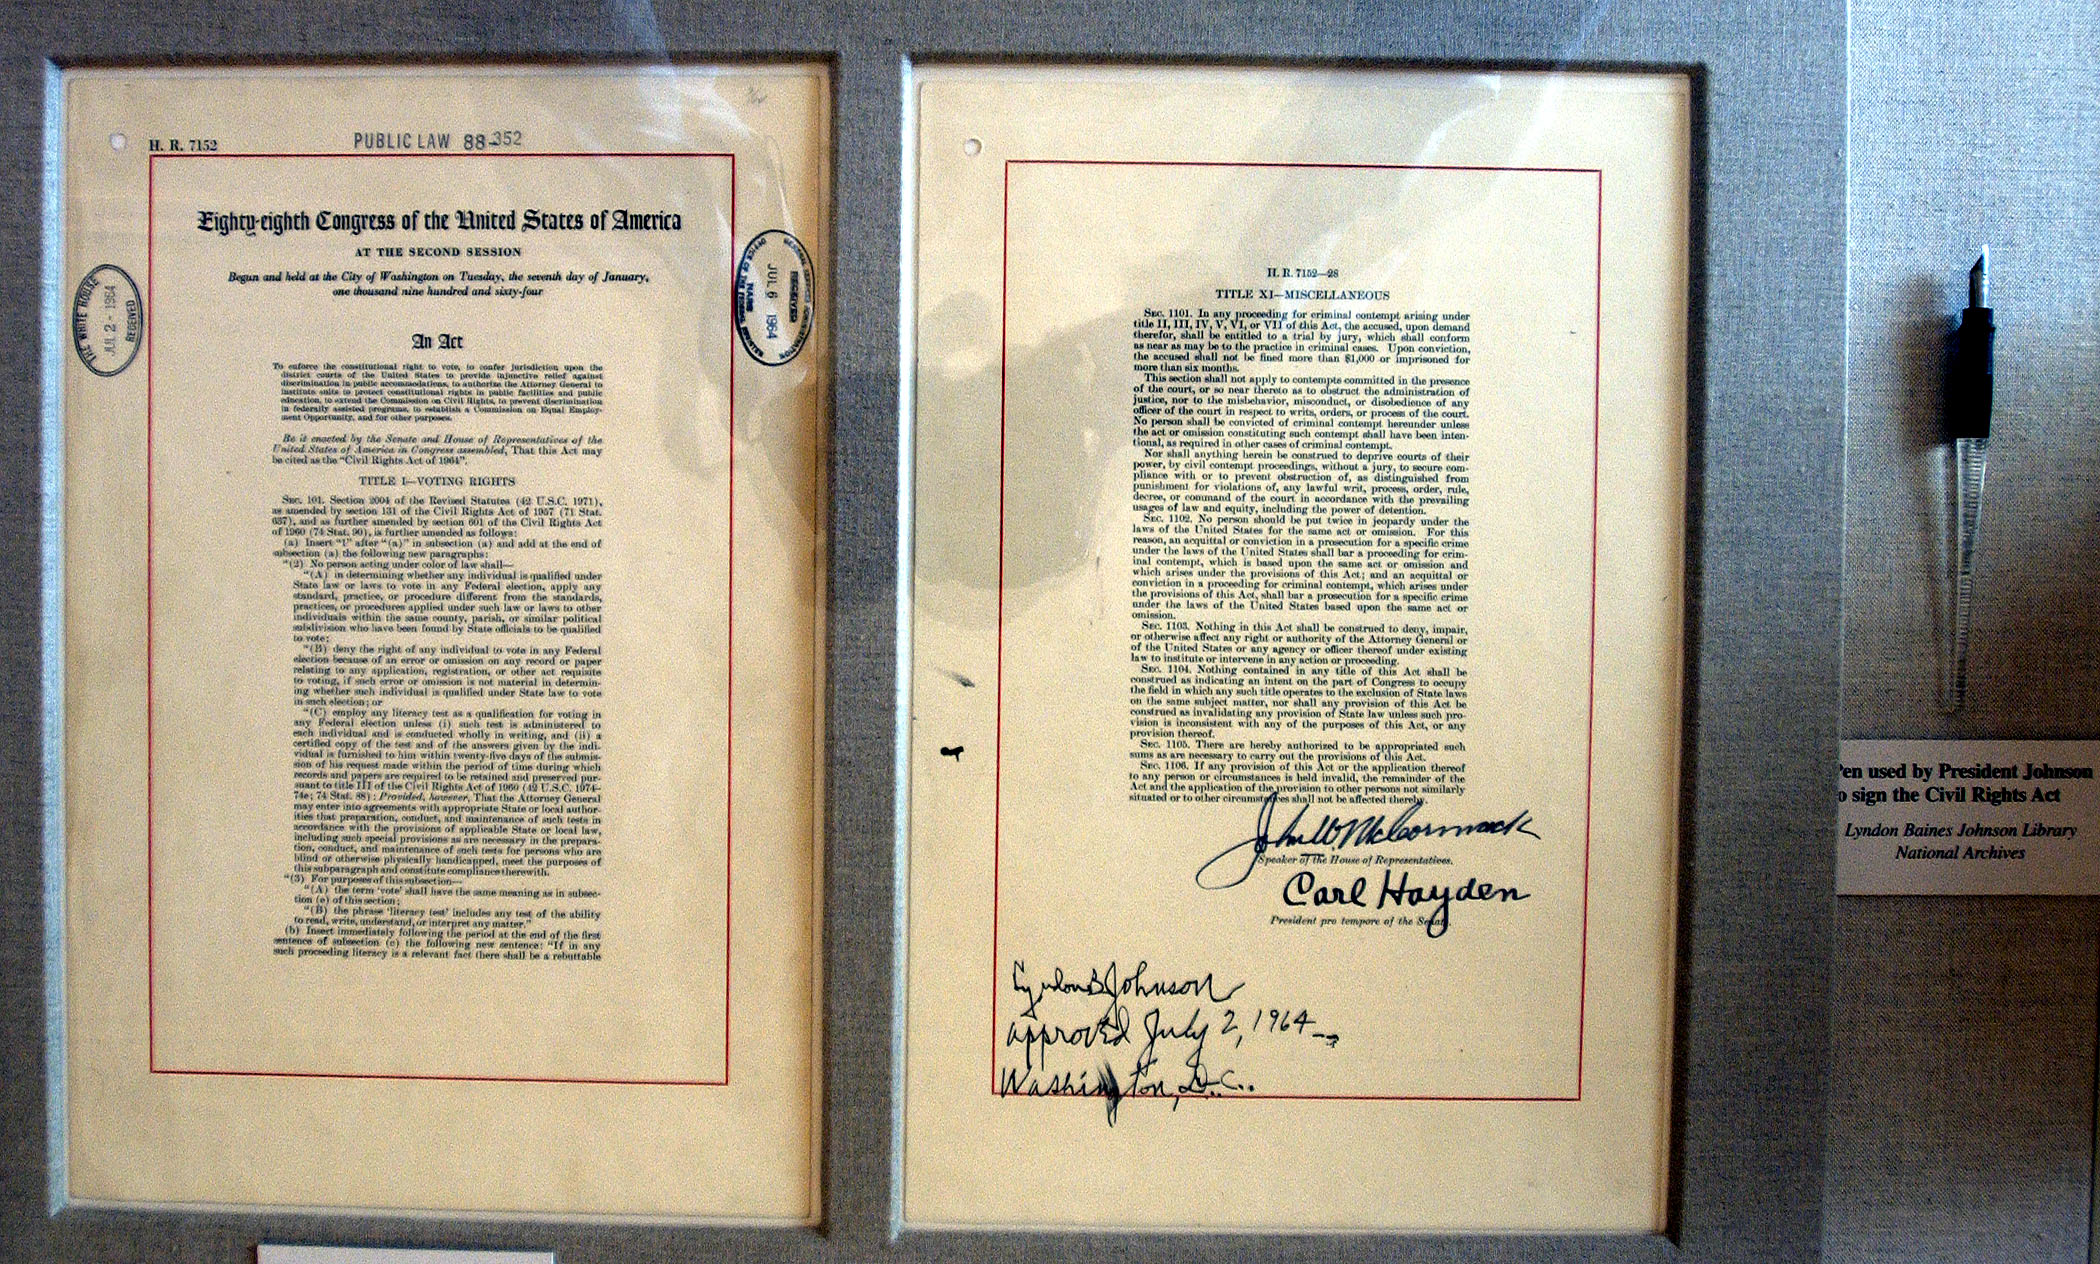 CIVIL RIGHTS DOCUMENT ON DISPLAY AT WHITE HOUSE.